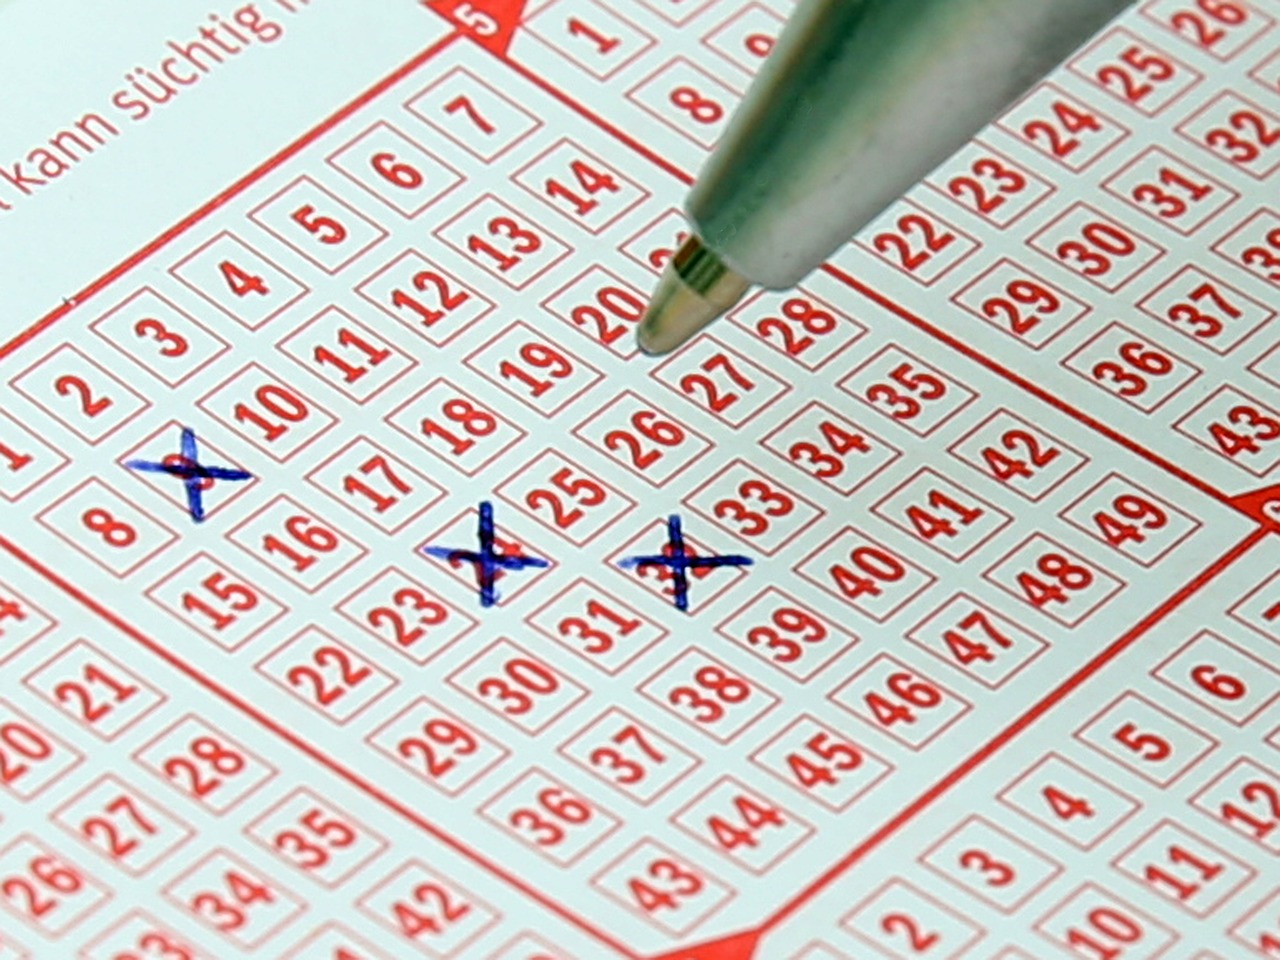 Download free photo of Lotto,lottery ticket,bill,profit,pay - from needpix.com